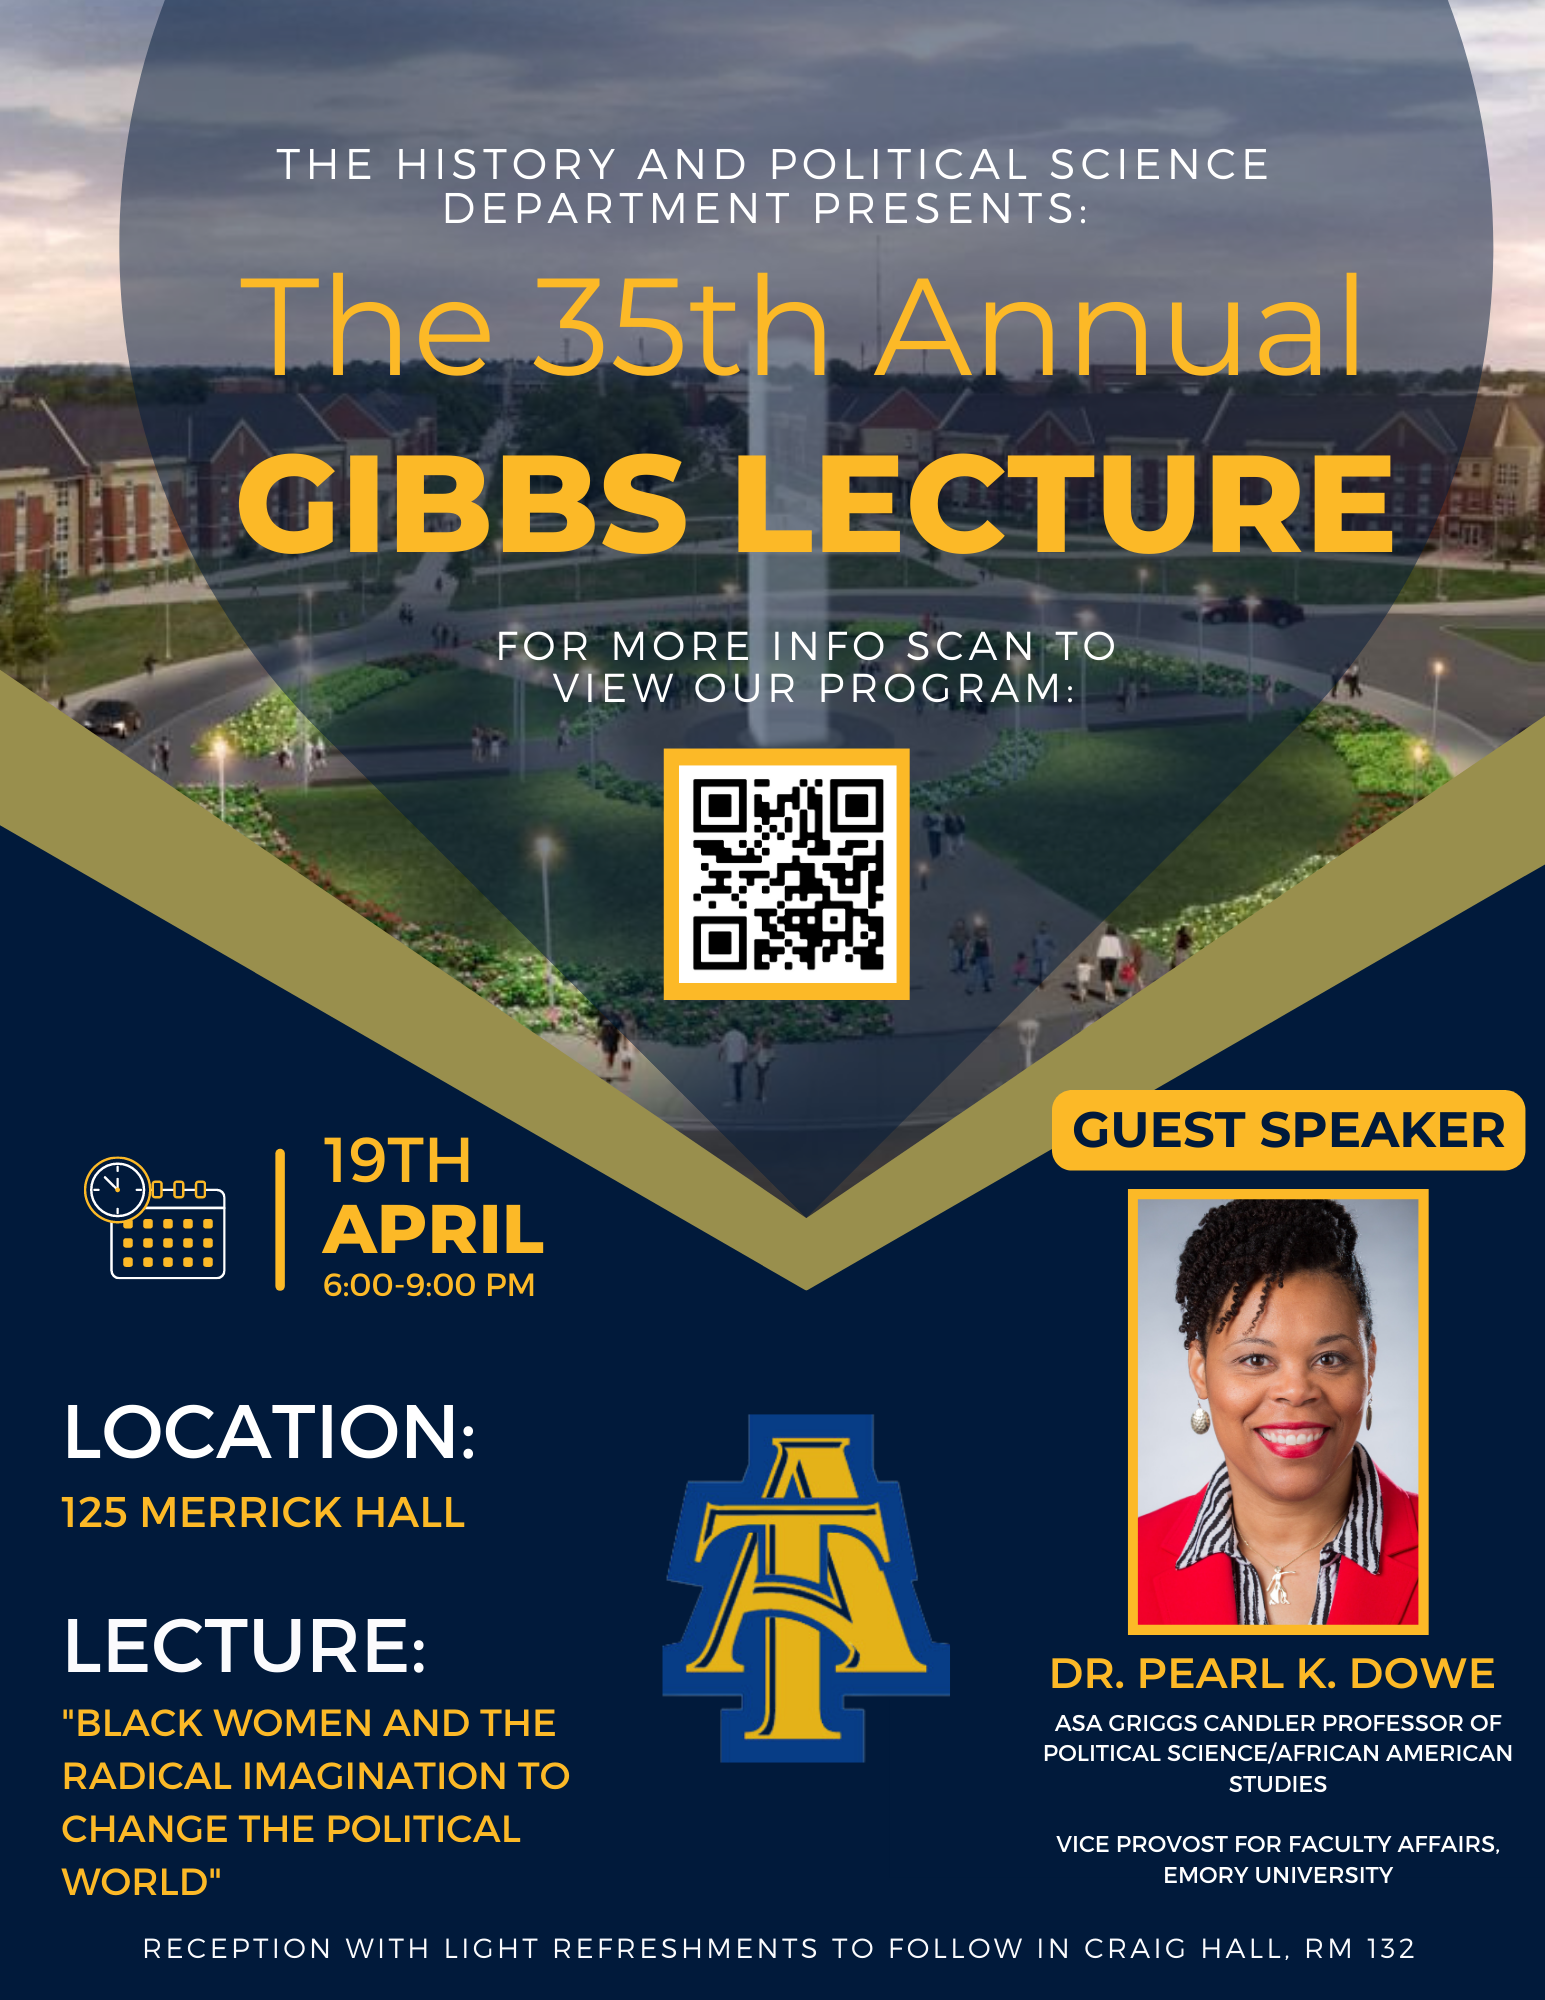 This is a photo of the 35th Annual Gibbs Lecture 